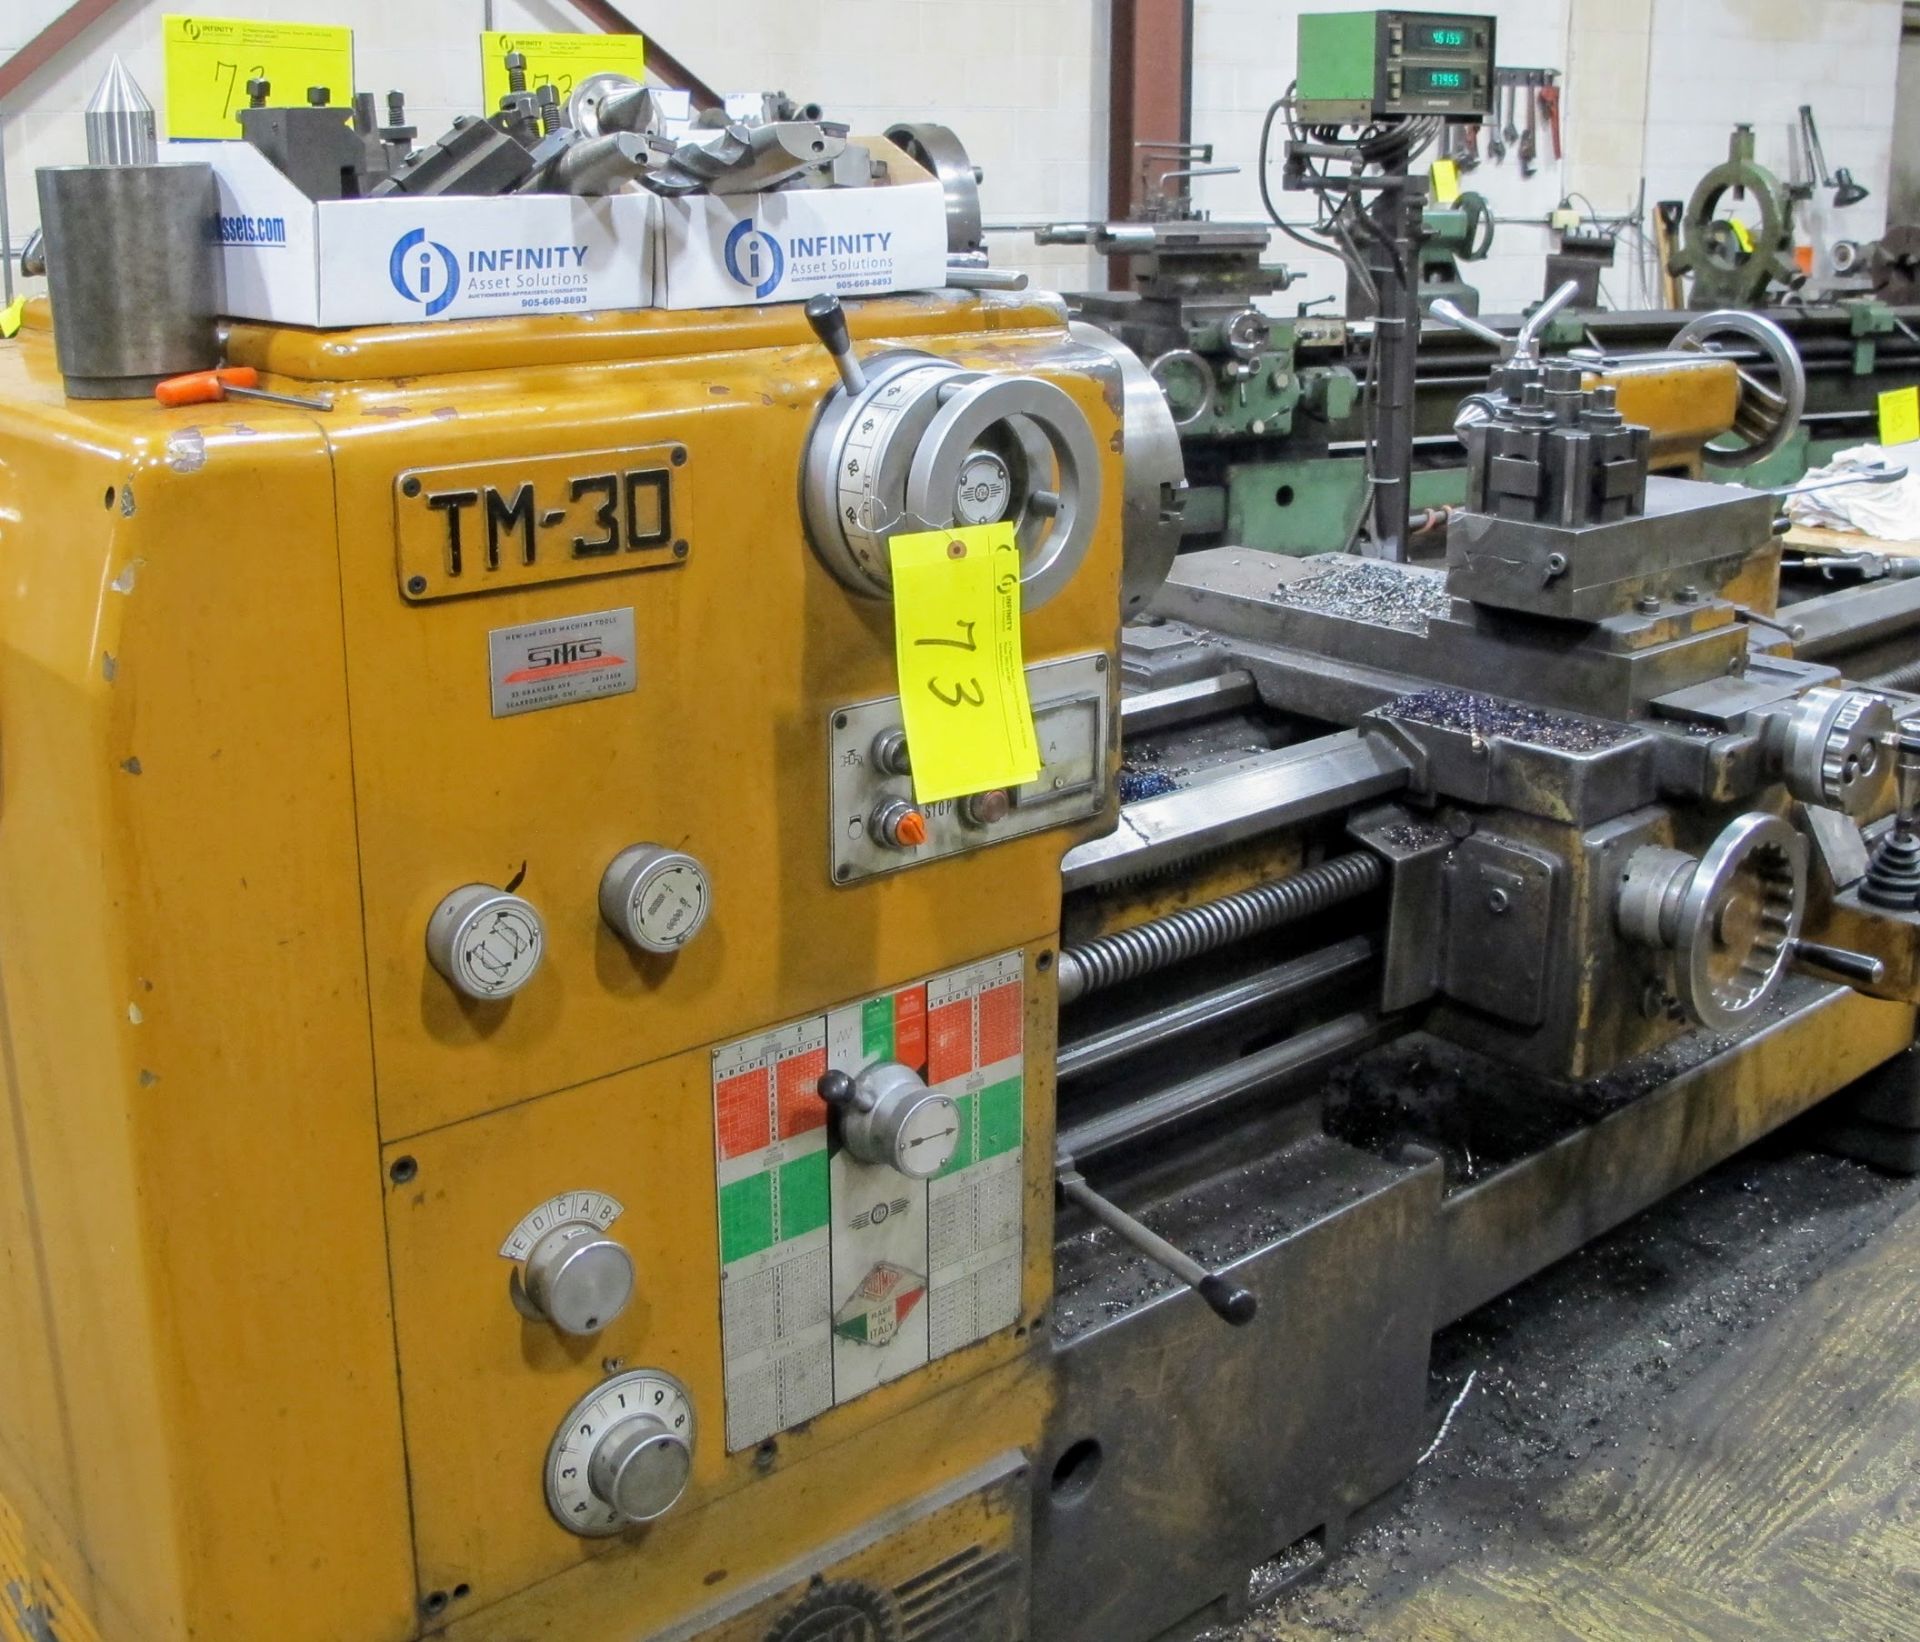 PBR TM-30 LATHE, 2-AXIS DRO, 12" 3-JAW CHUCK, 12' BED, 15 - 1,500 RPM, QUICK CHANGE TOOL HOLDER,